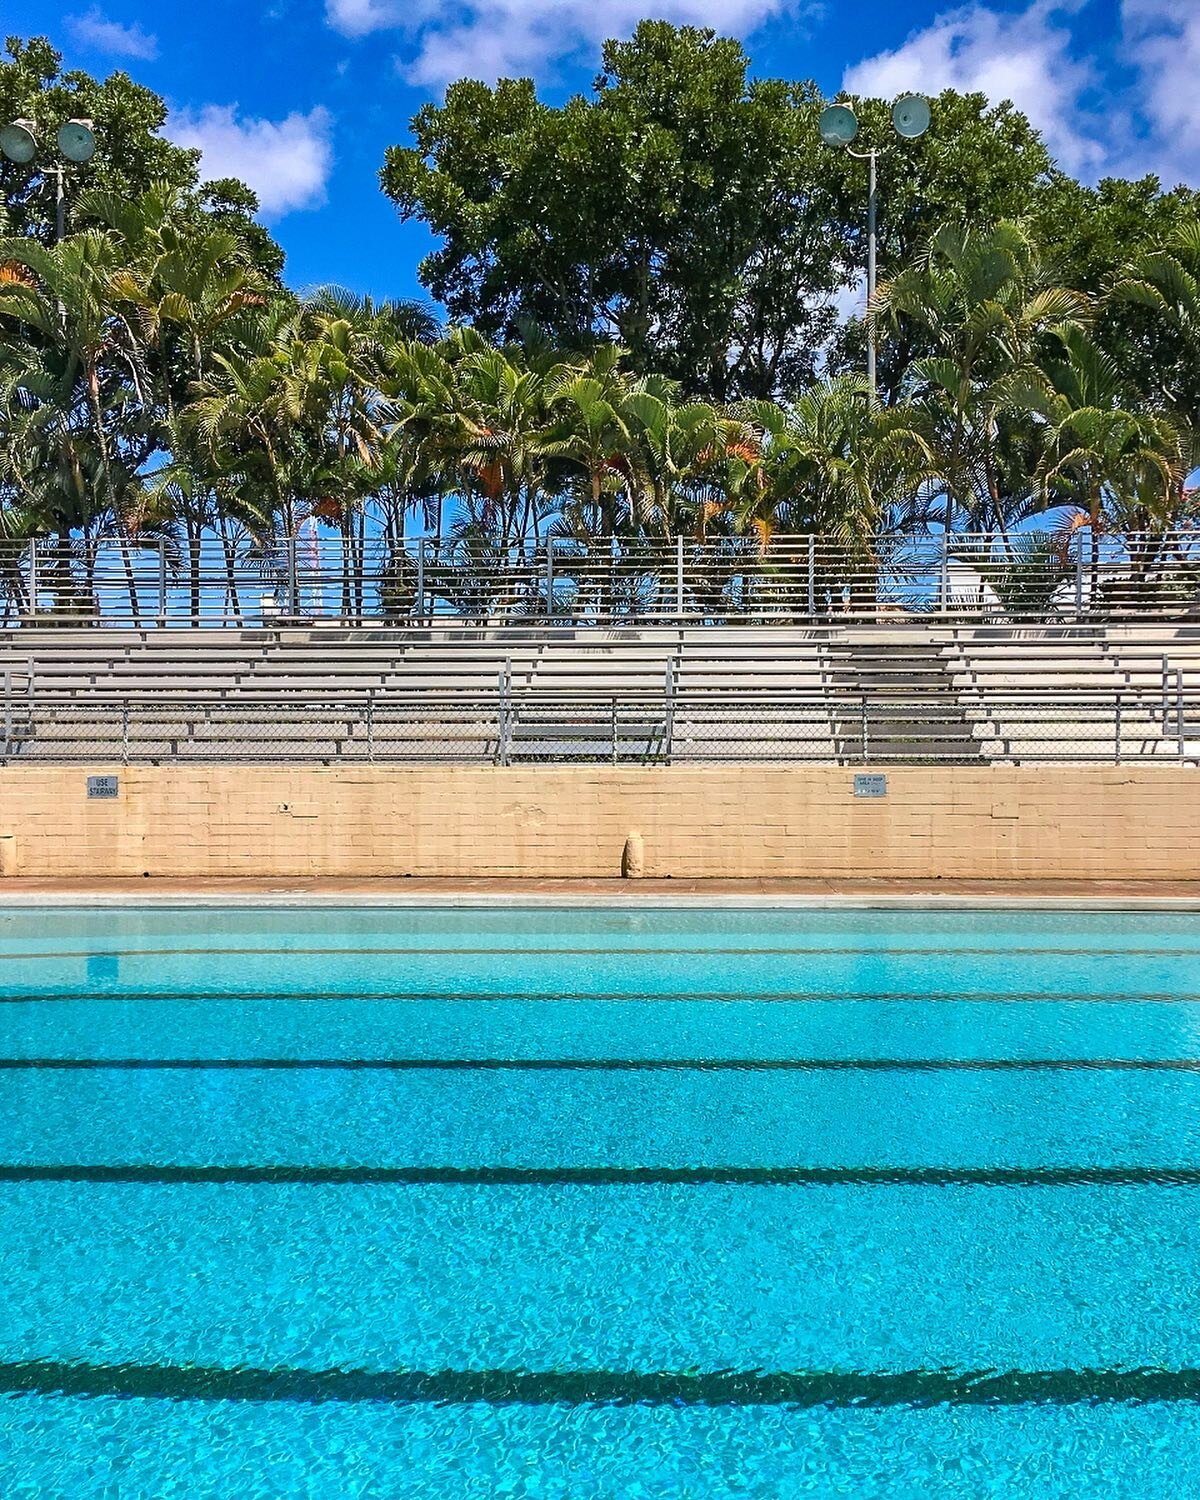 Honolulu&rsquo;s first recreational swimming pool was opened in 1949 🏊&zwj;♂️ ✨ and is dedicated to the men from Wahiawā who died in World War II. Have you ever visited the Hawaii islands? 🏝 🇺🇸
.
.
📸: photo by @honolulumag 
#swimvenue
#swimming